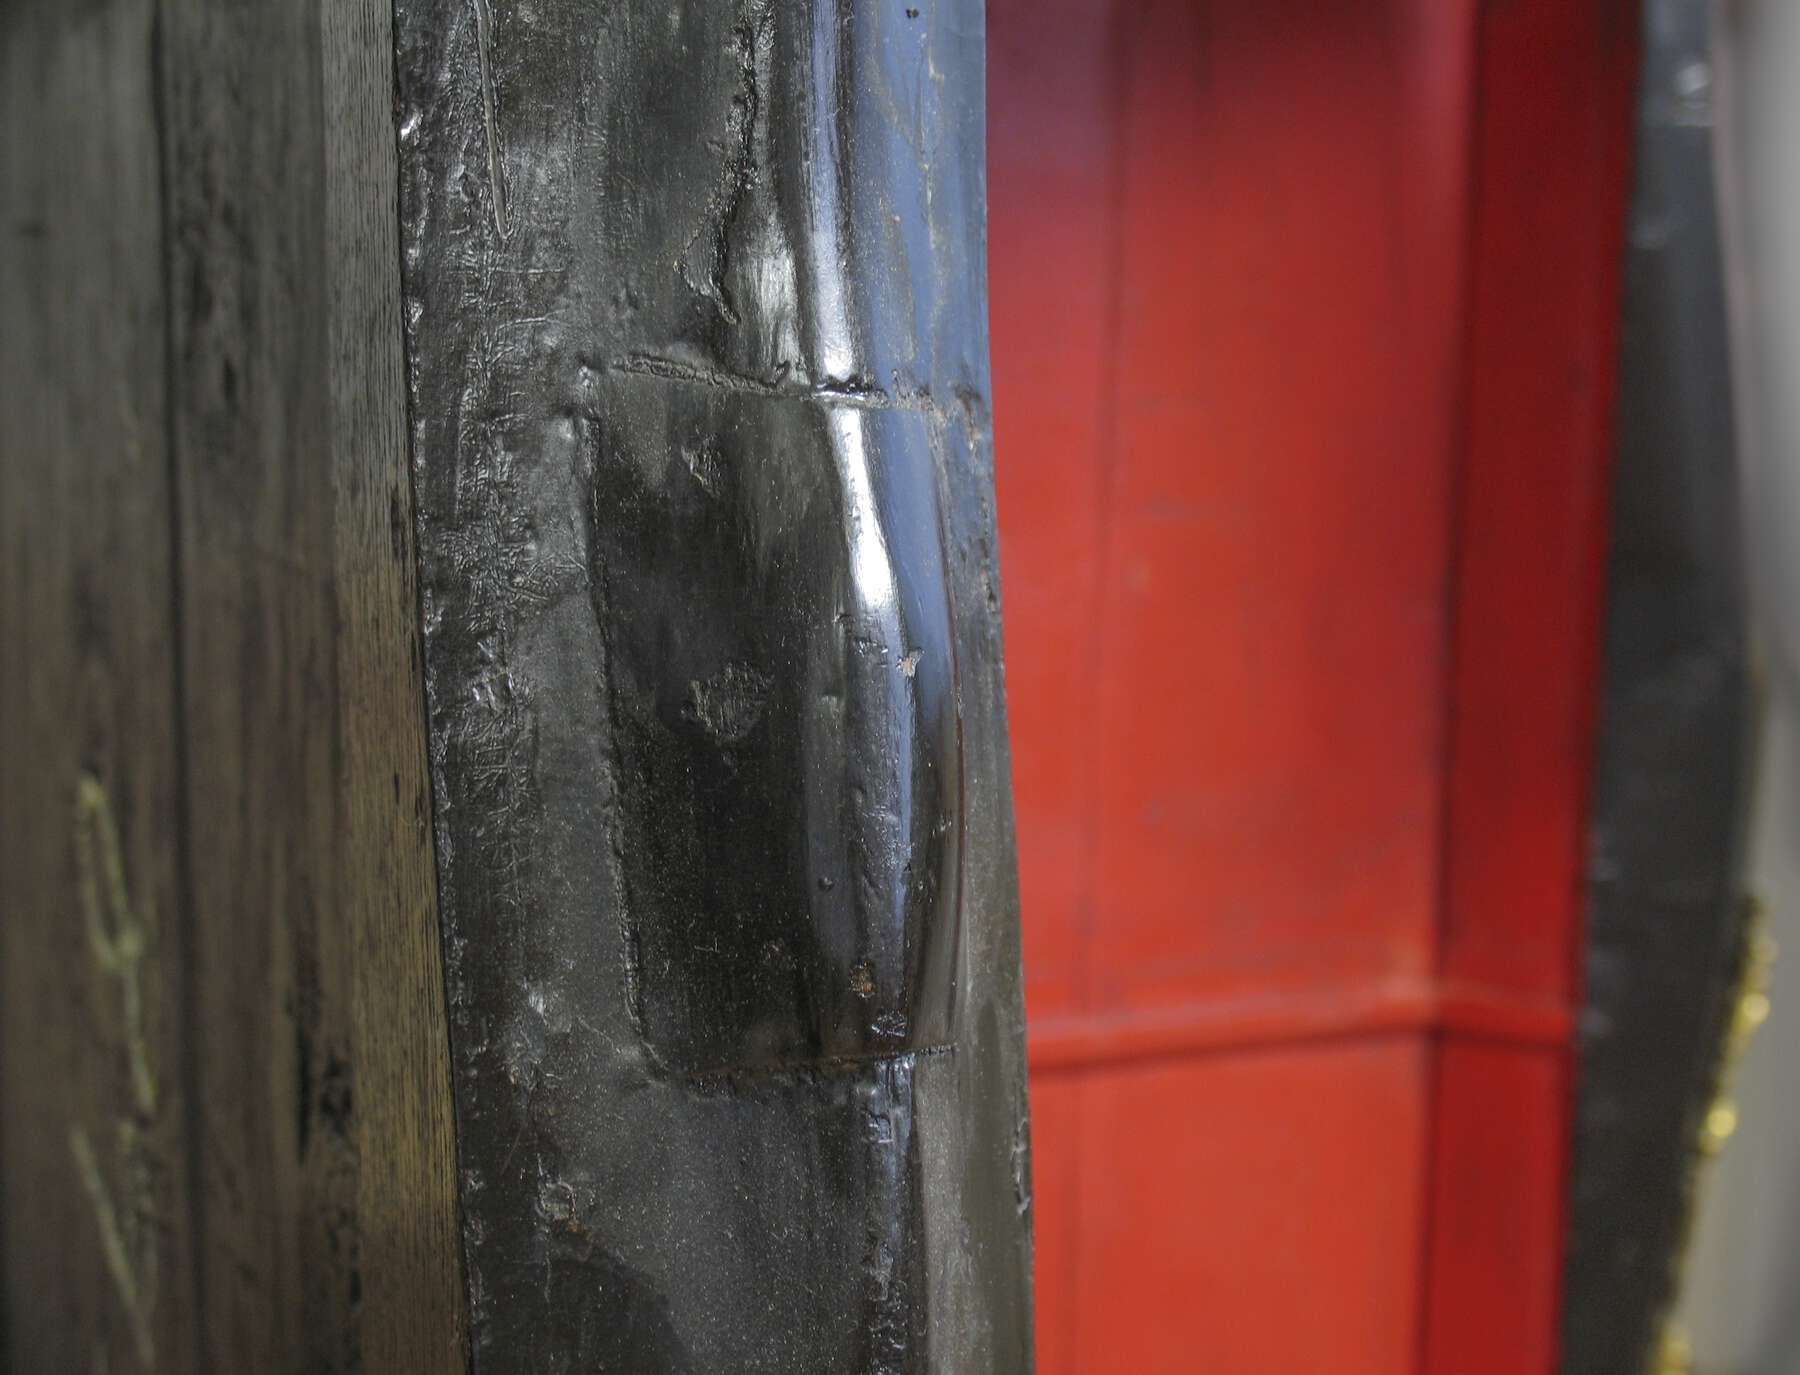 detail of a raised block of black wood on one of the front posts and red interior in the background